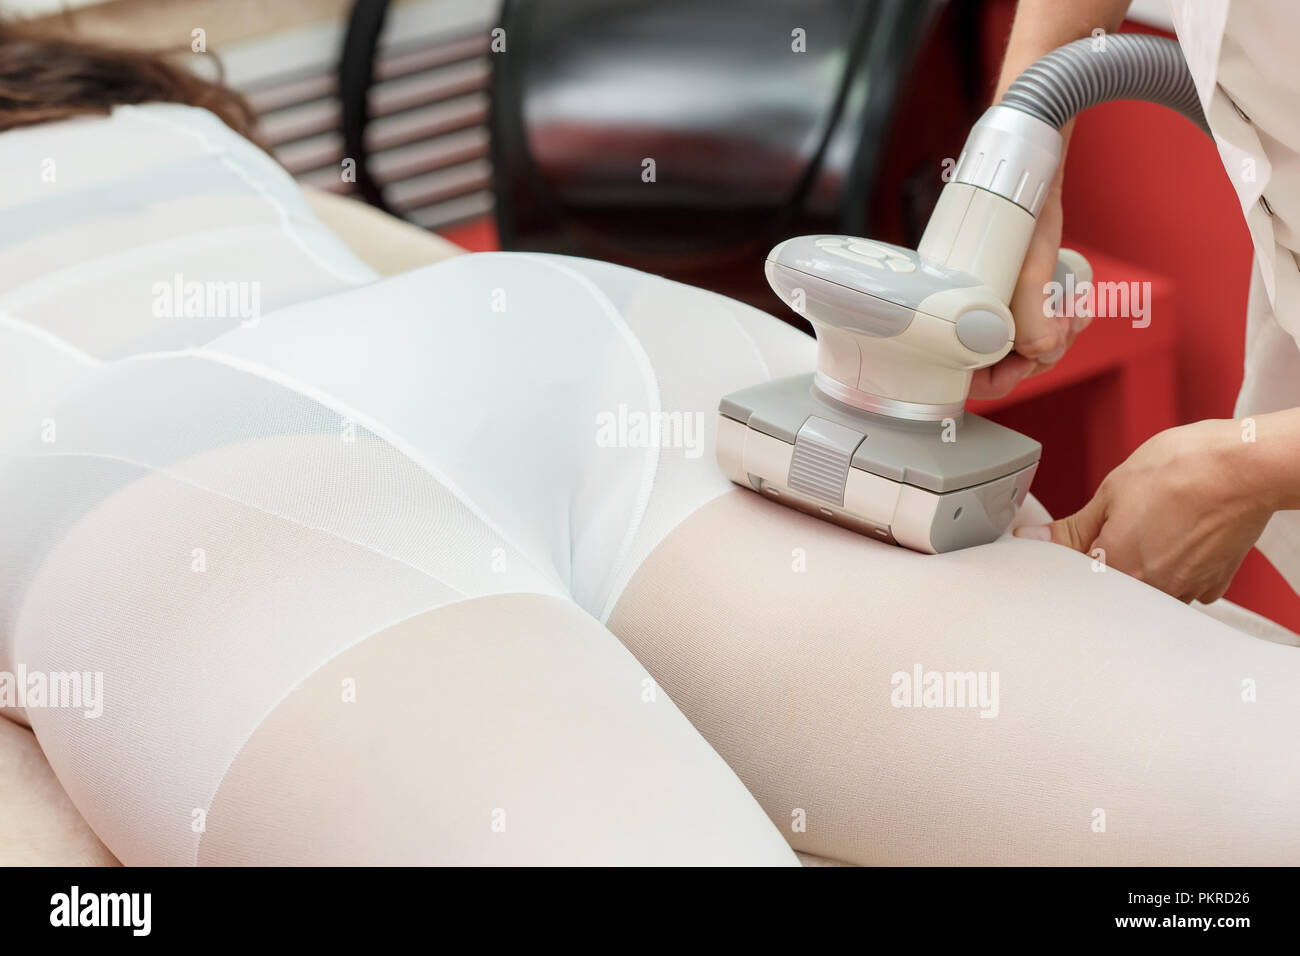 Lymphatic drainage massage LPG or R-sleek apparatus process. Woman in white  suit getting anti cellulite massage in a beauty salon. Skin and body care  Stock Photo - Alamy